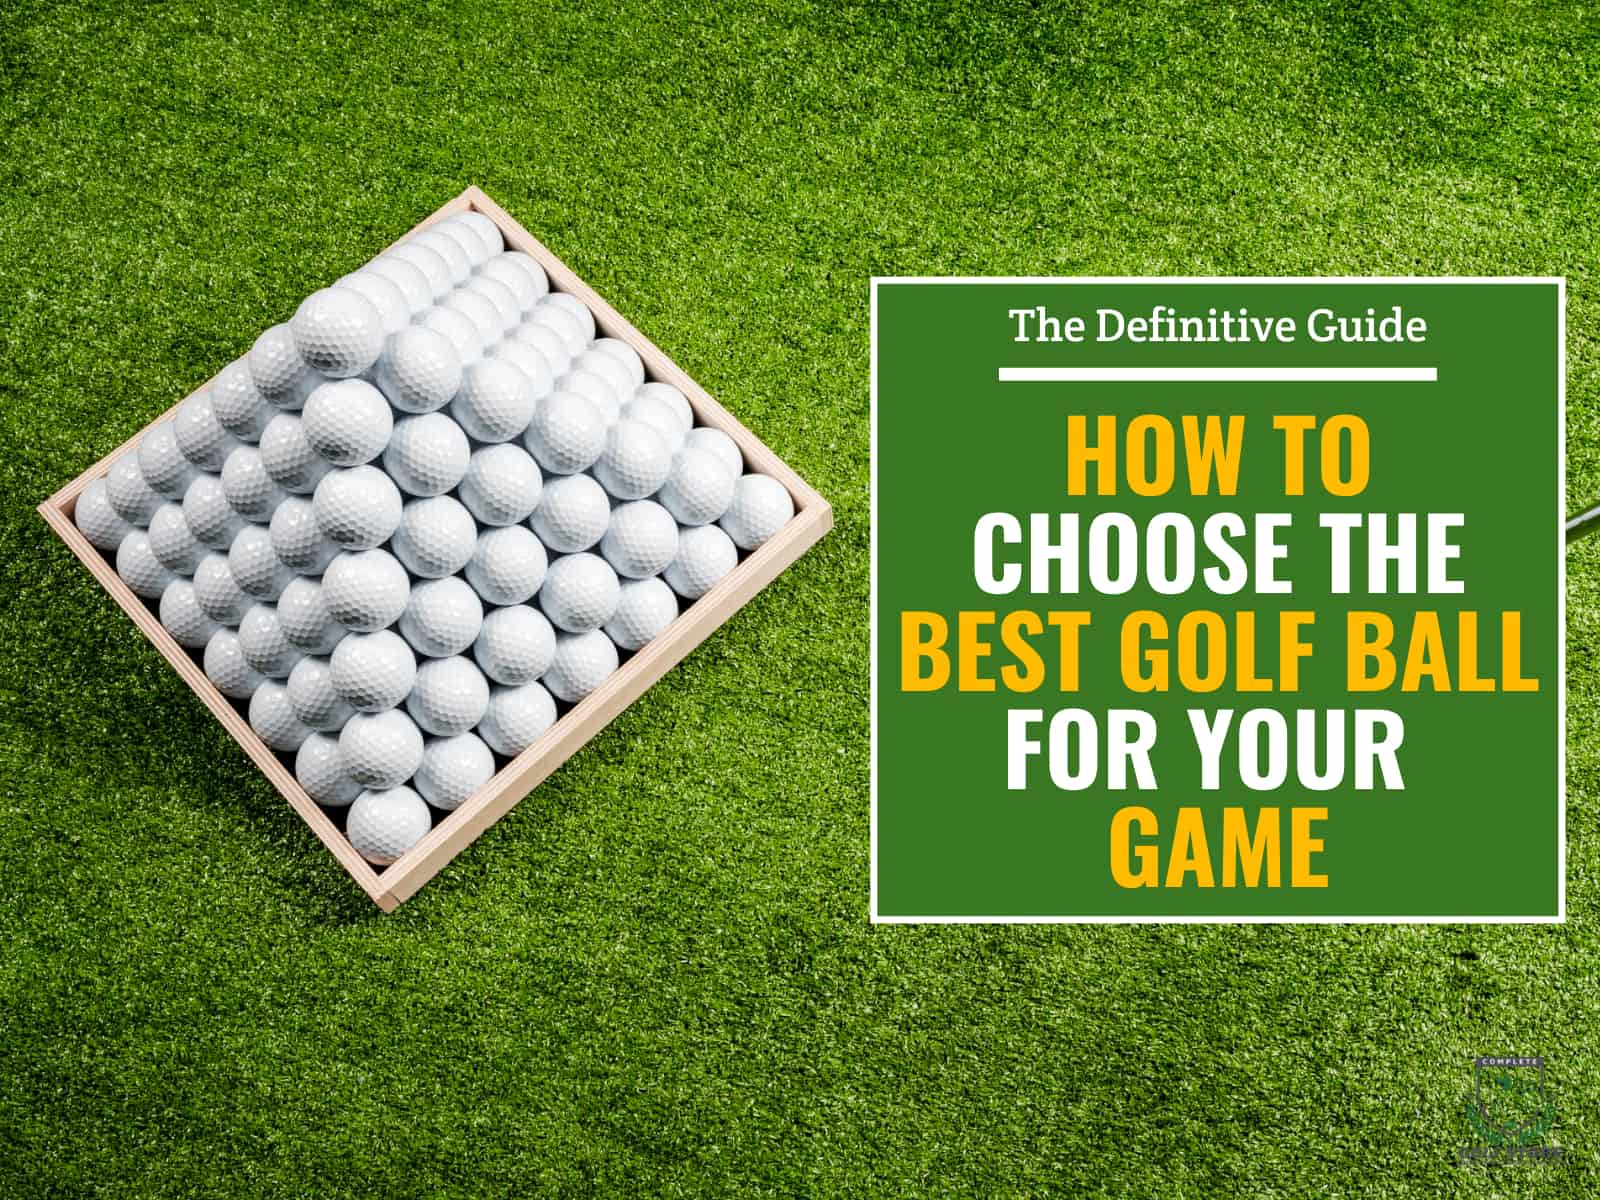 A pyramid of golf balls placed on top of a golf hitting mat with green textbox on the right that contains the text 